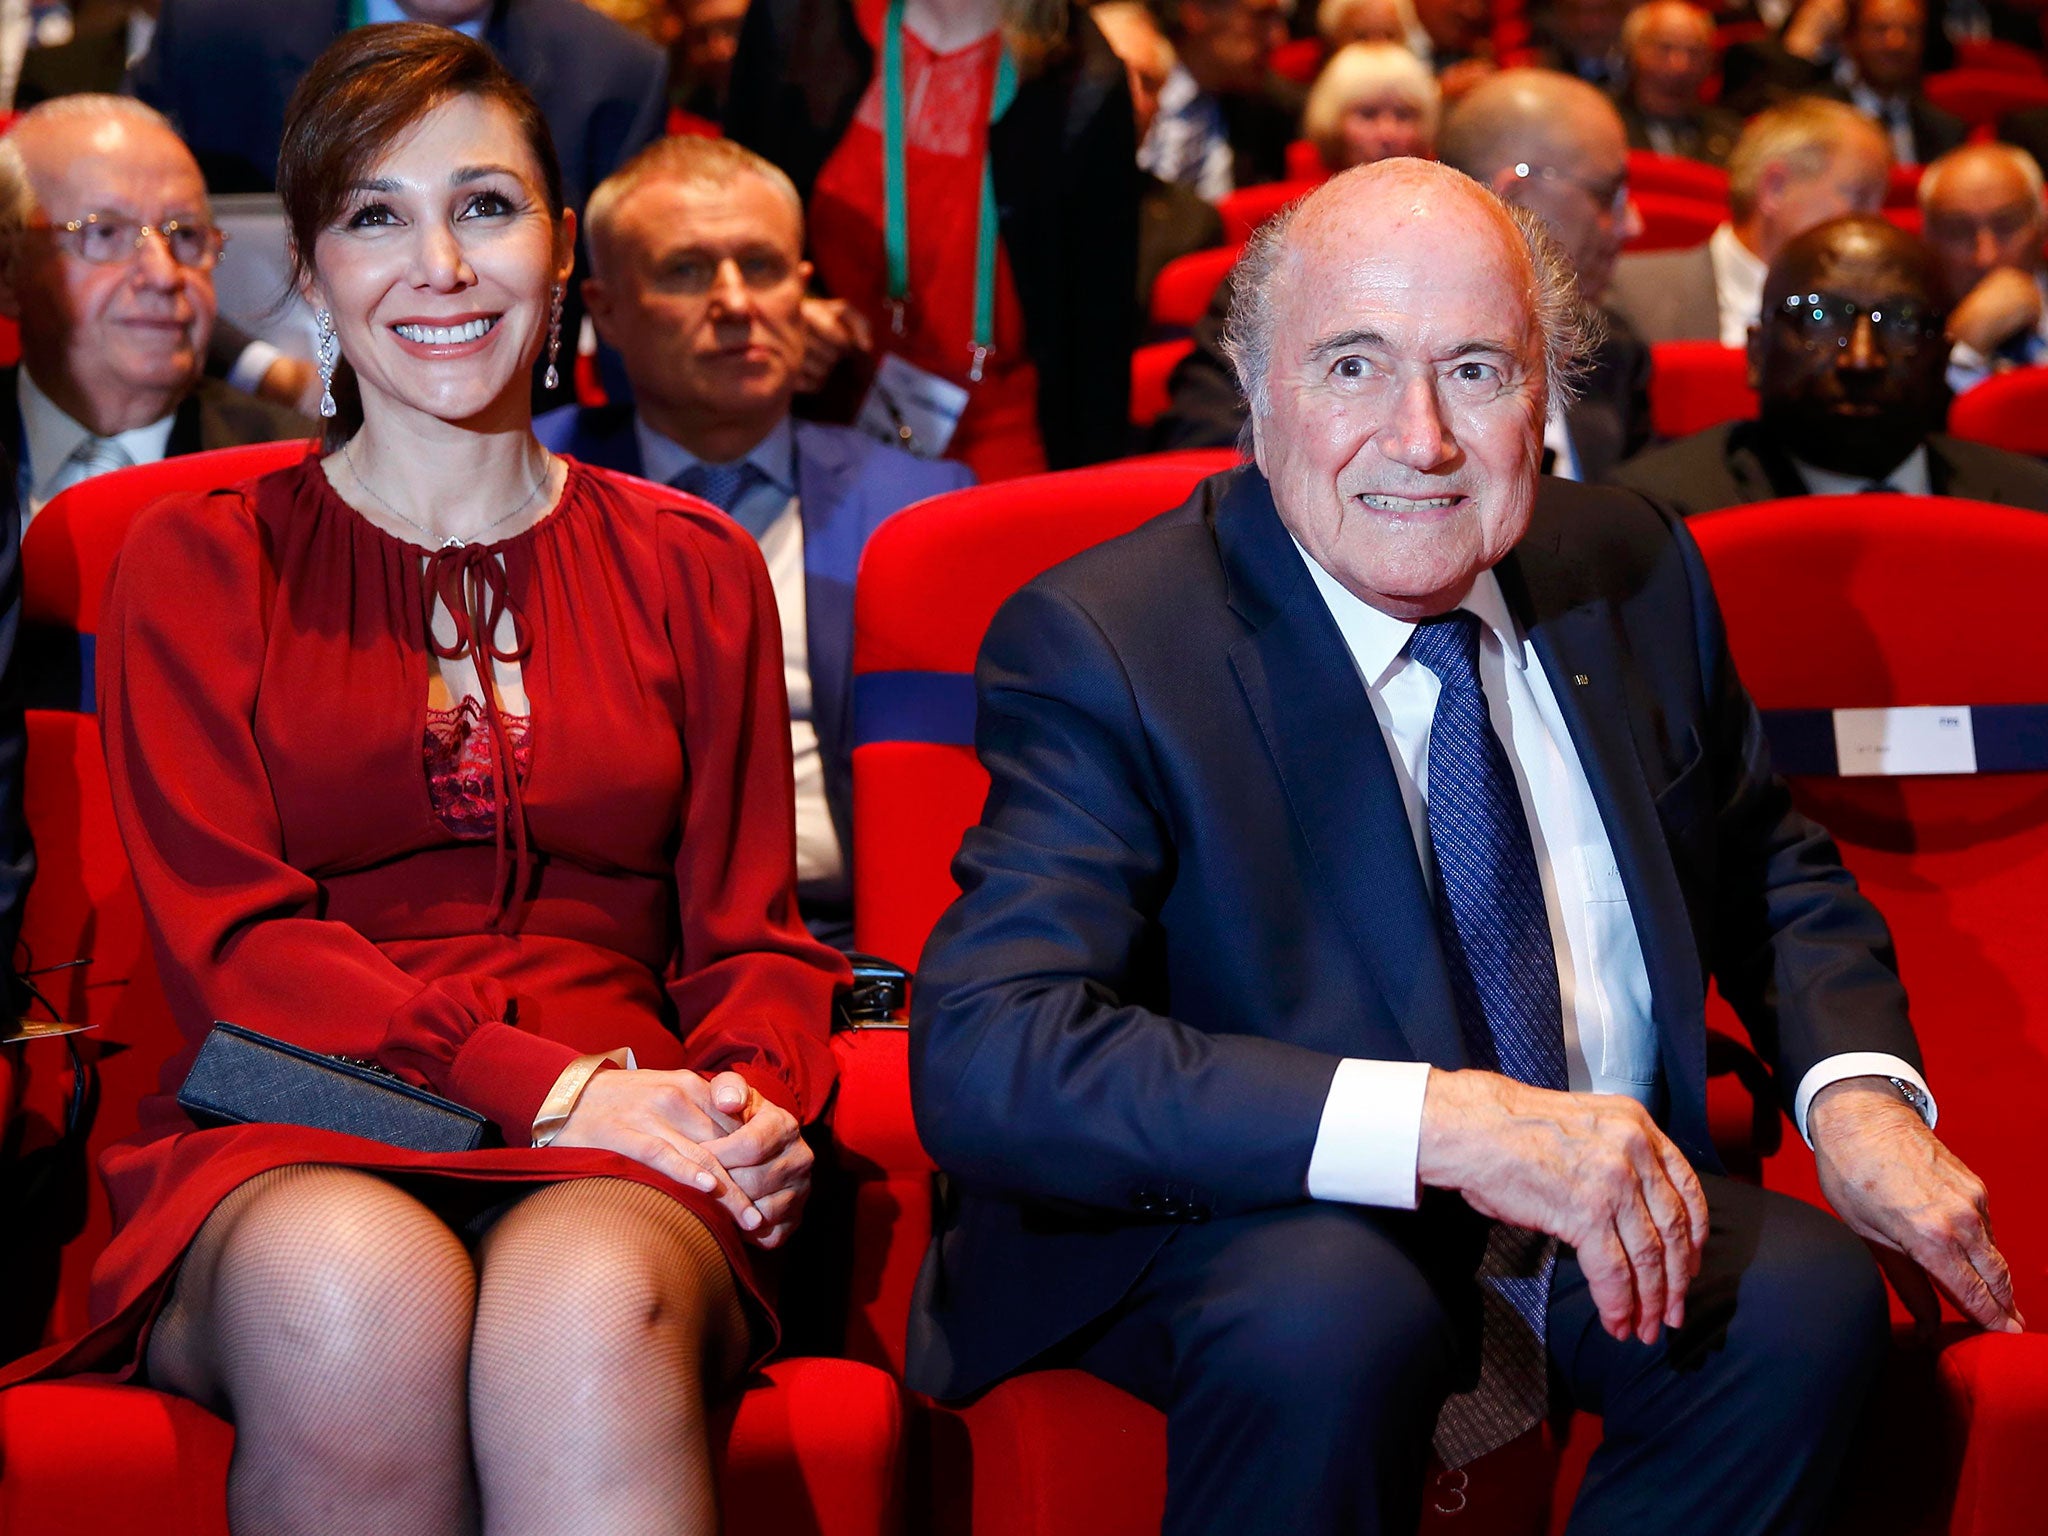 Sepp Blatter and his partner, Linda Barras, arrive at the Fifa Congress in Zurich